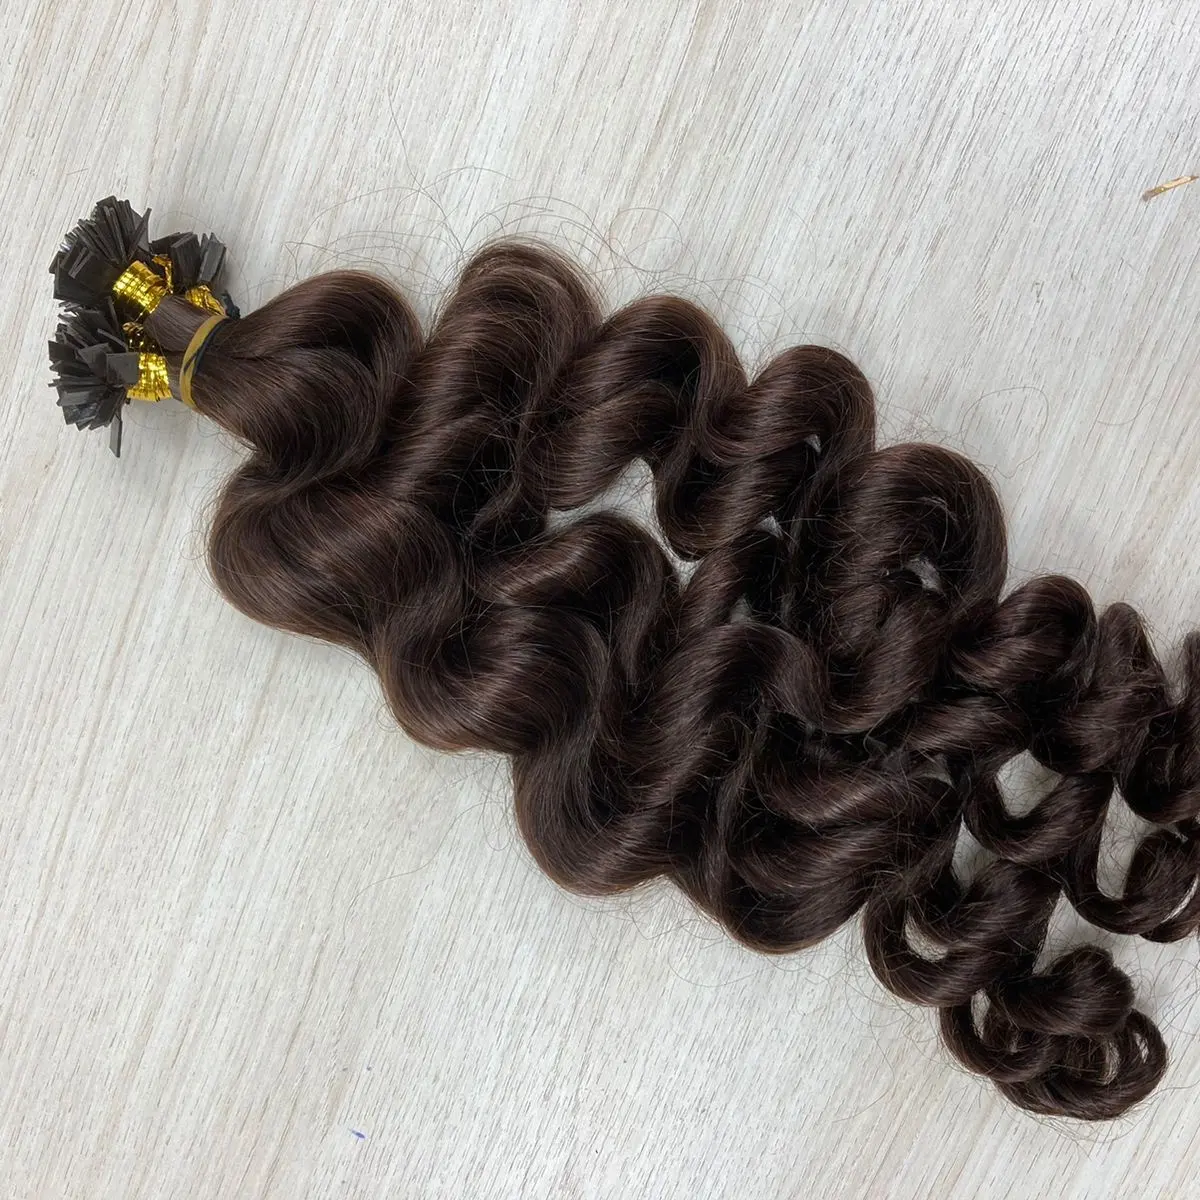 Body wavy Flat tip Pre bonded hair extensions Brown Raw hair human hair no tangle no shedding Unprocessed